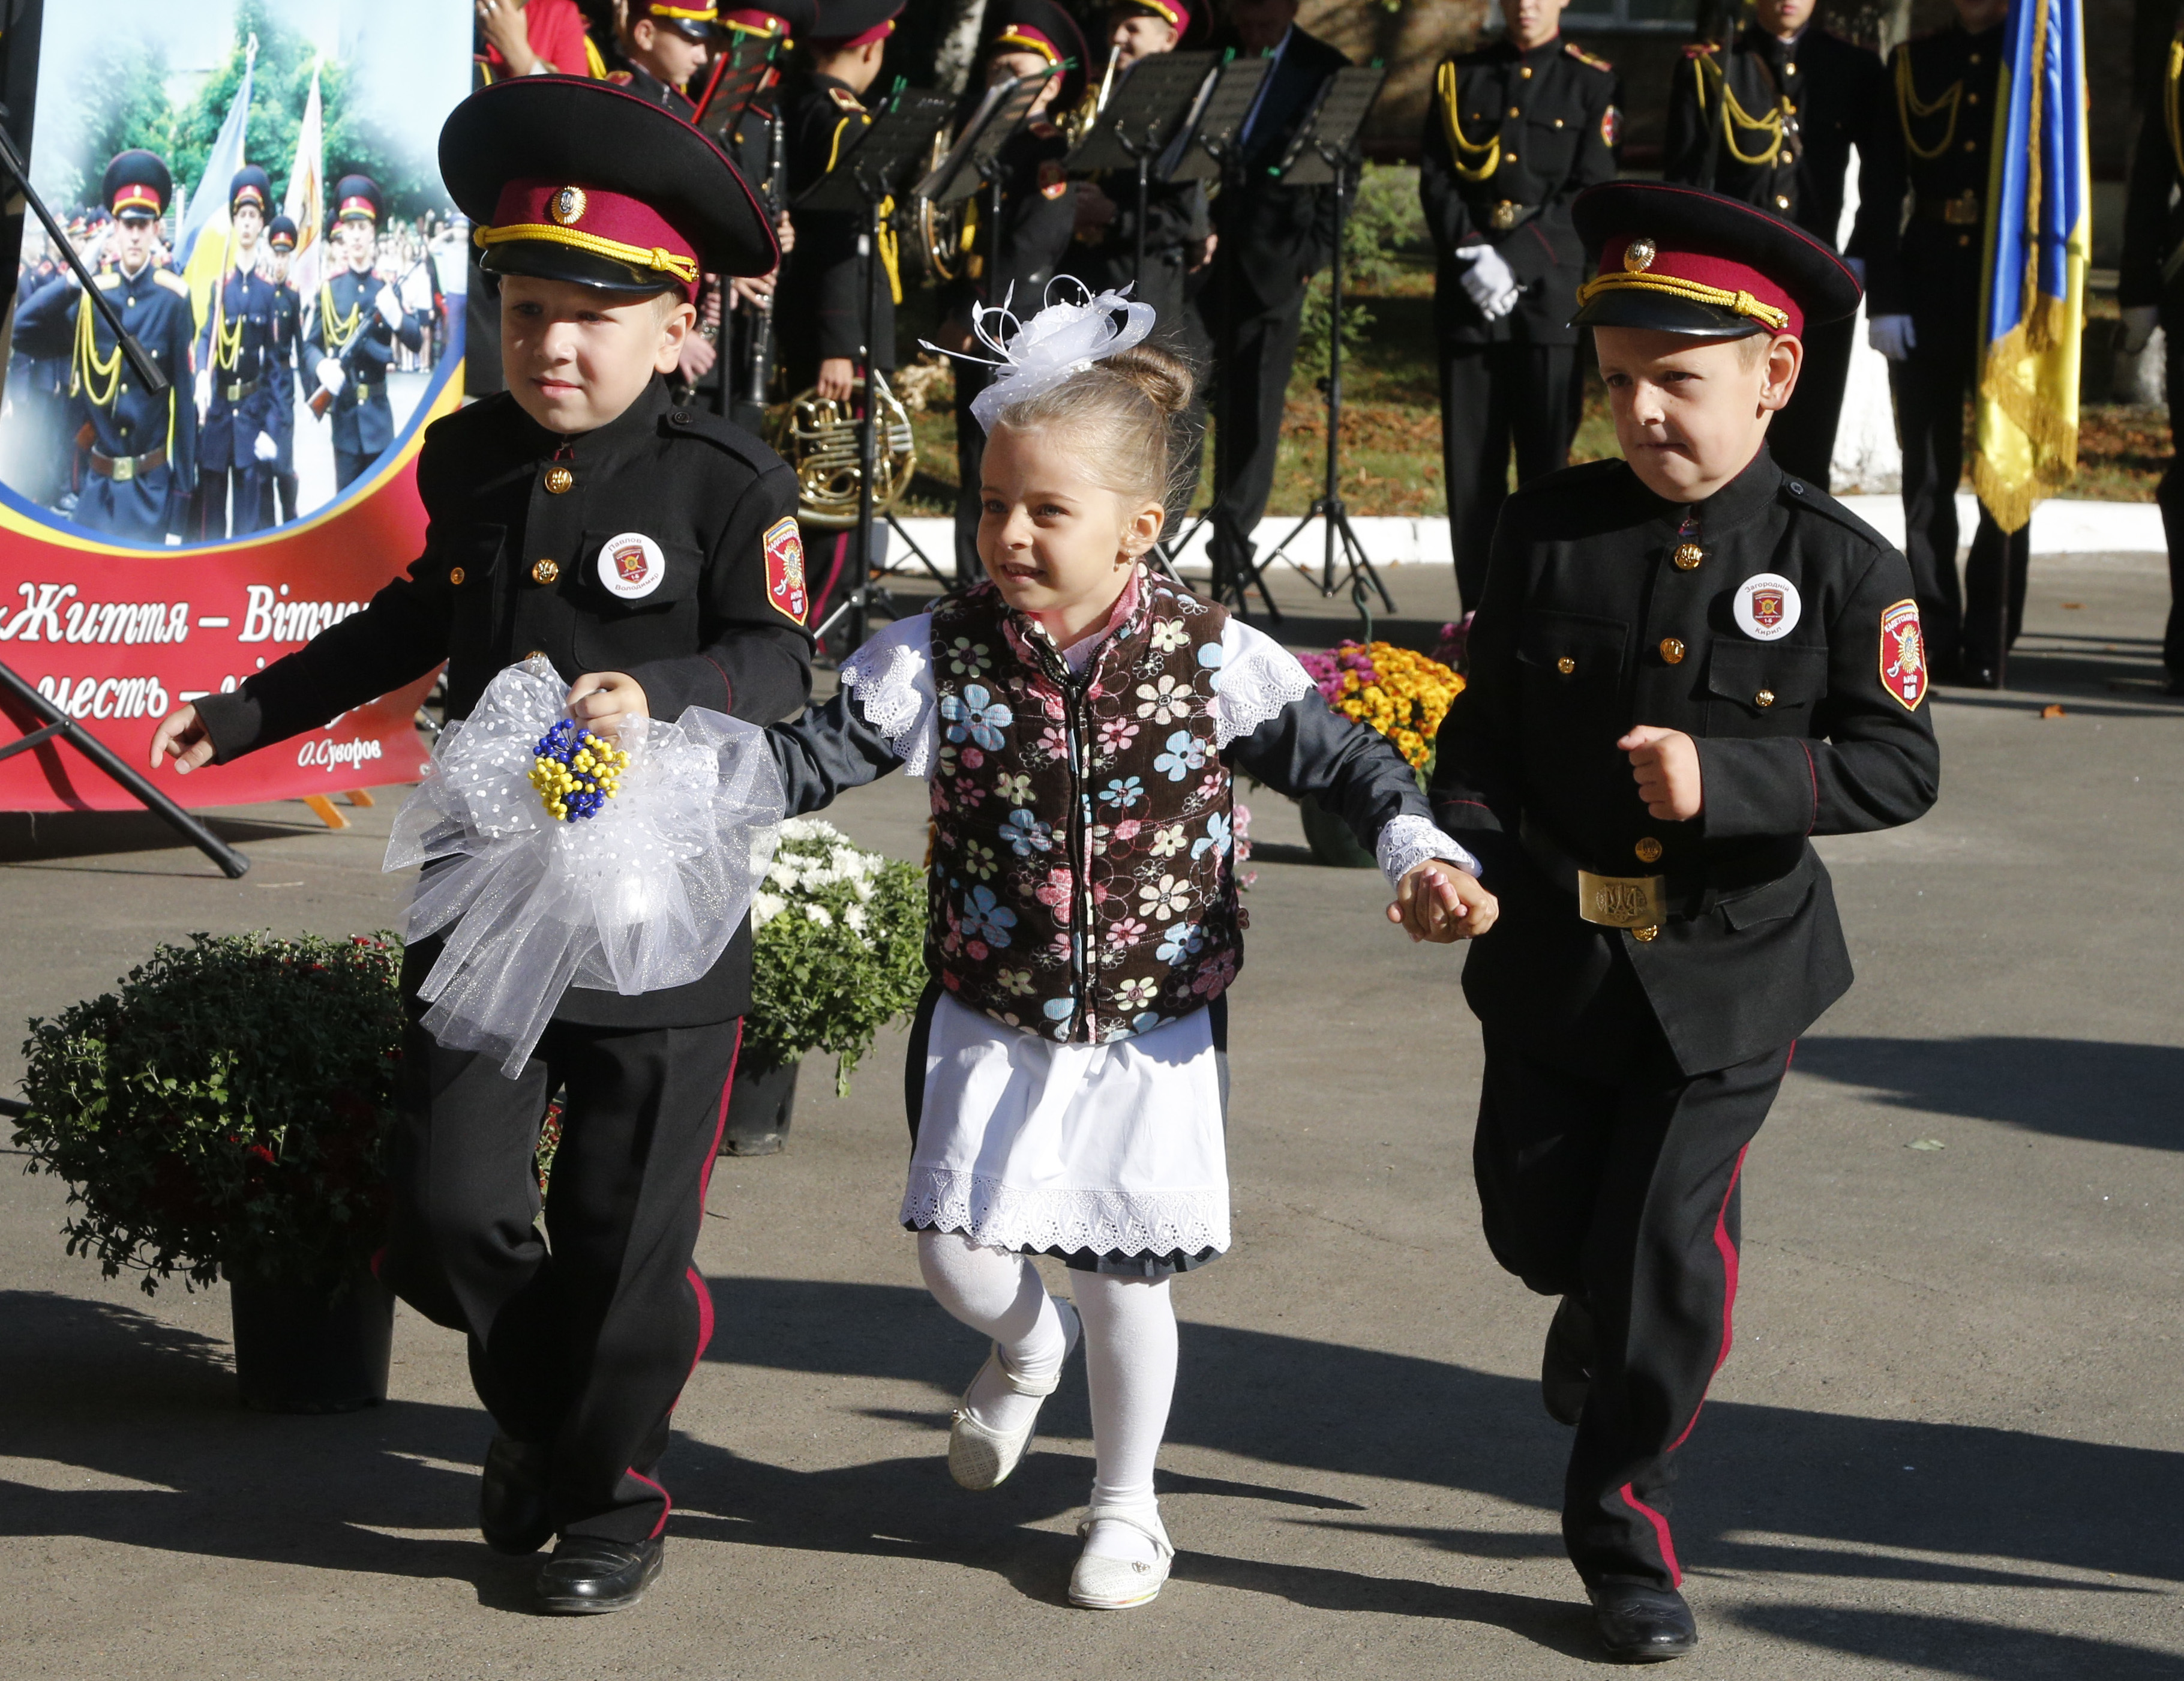 New cadets, a girl and two boys, run as they ring a symbolic bell at a ceremony on the occasion of the first day in school at a cadet lyceum in Kiev,Ukraine, Friday, Sept. 1, 2017. Ukraine marks Sept. 1 as Knowledge Day, as a traditional launch of the academic year. (AP Photo/Efrem Lukatsky)